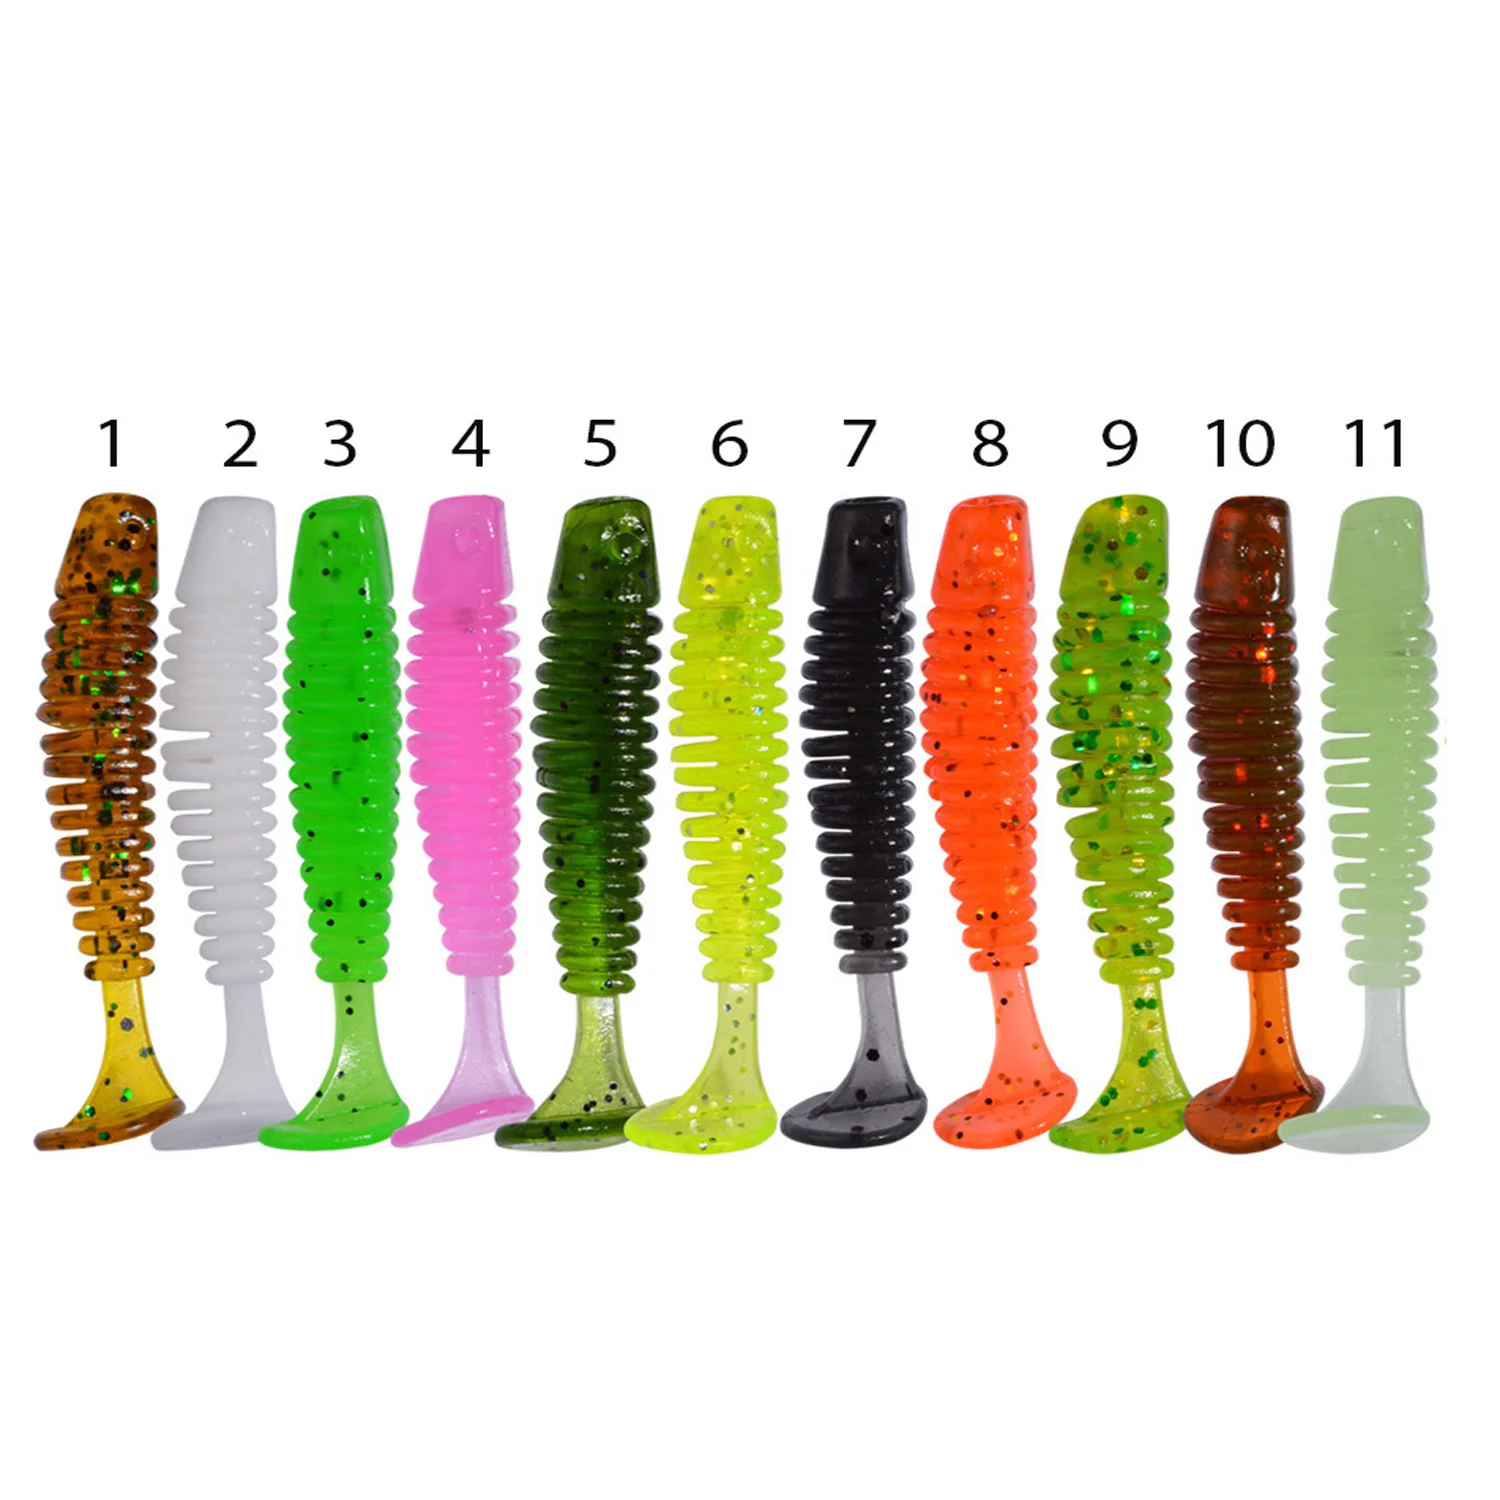 

Soft Artificial Fishing Lures 38mm 0.8g T Tail Grub Lures Worm Baits plastic Lures Fishing Tackle, 11colors